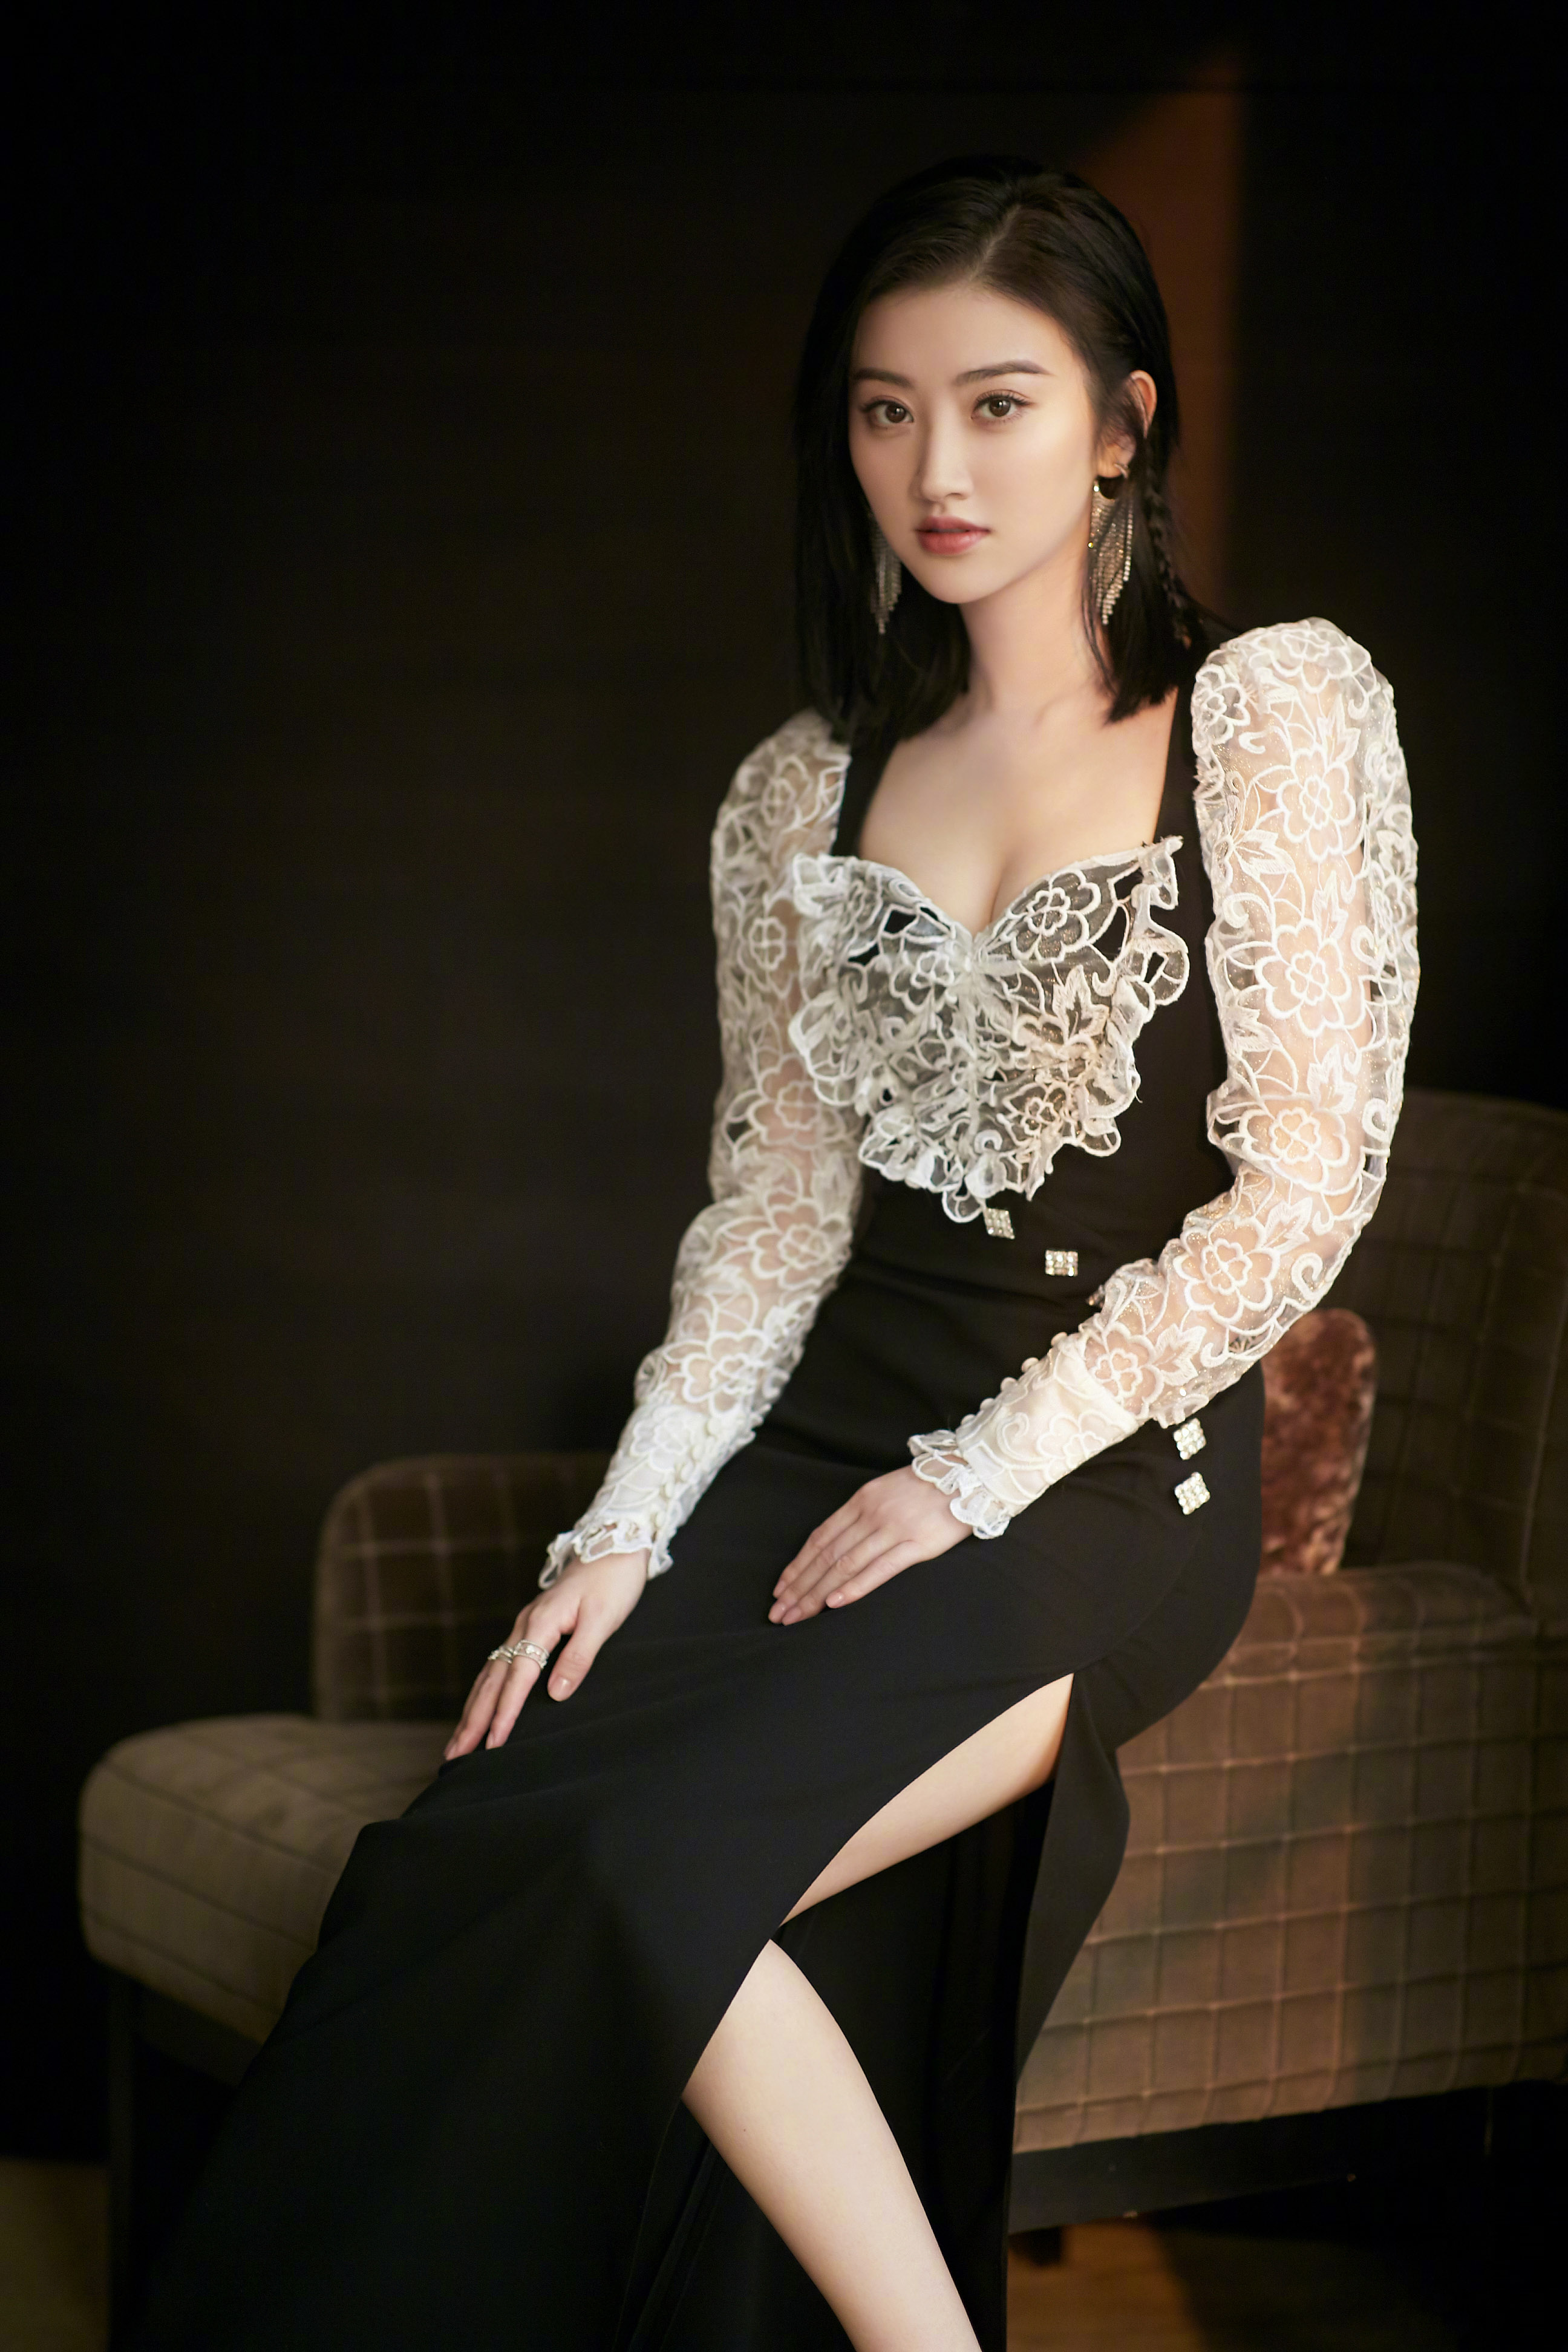 Jing Tian is really high-profile. She wears a black dress and shows her ...